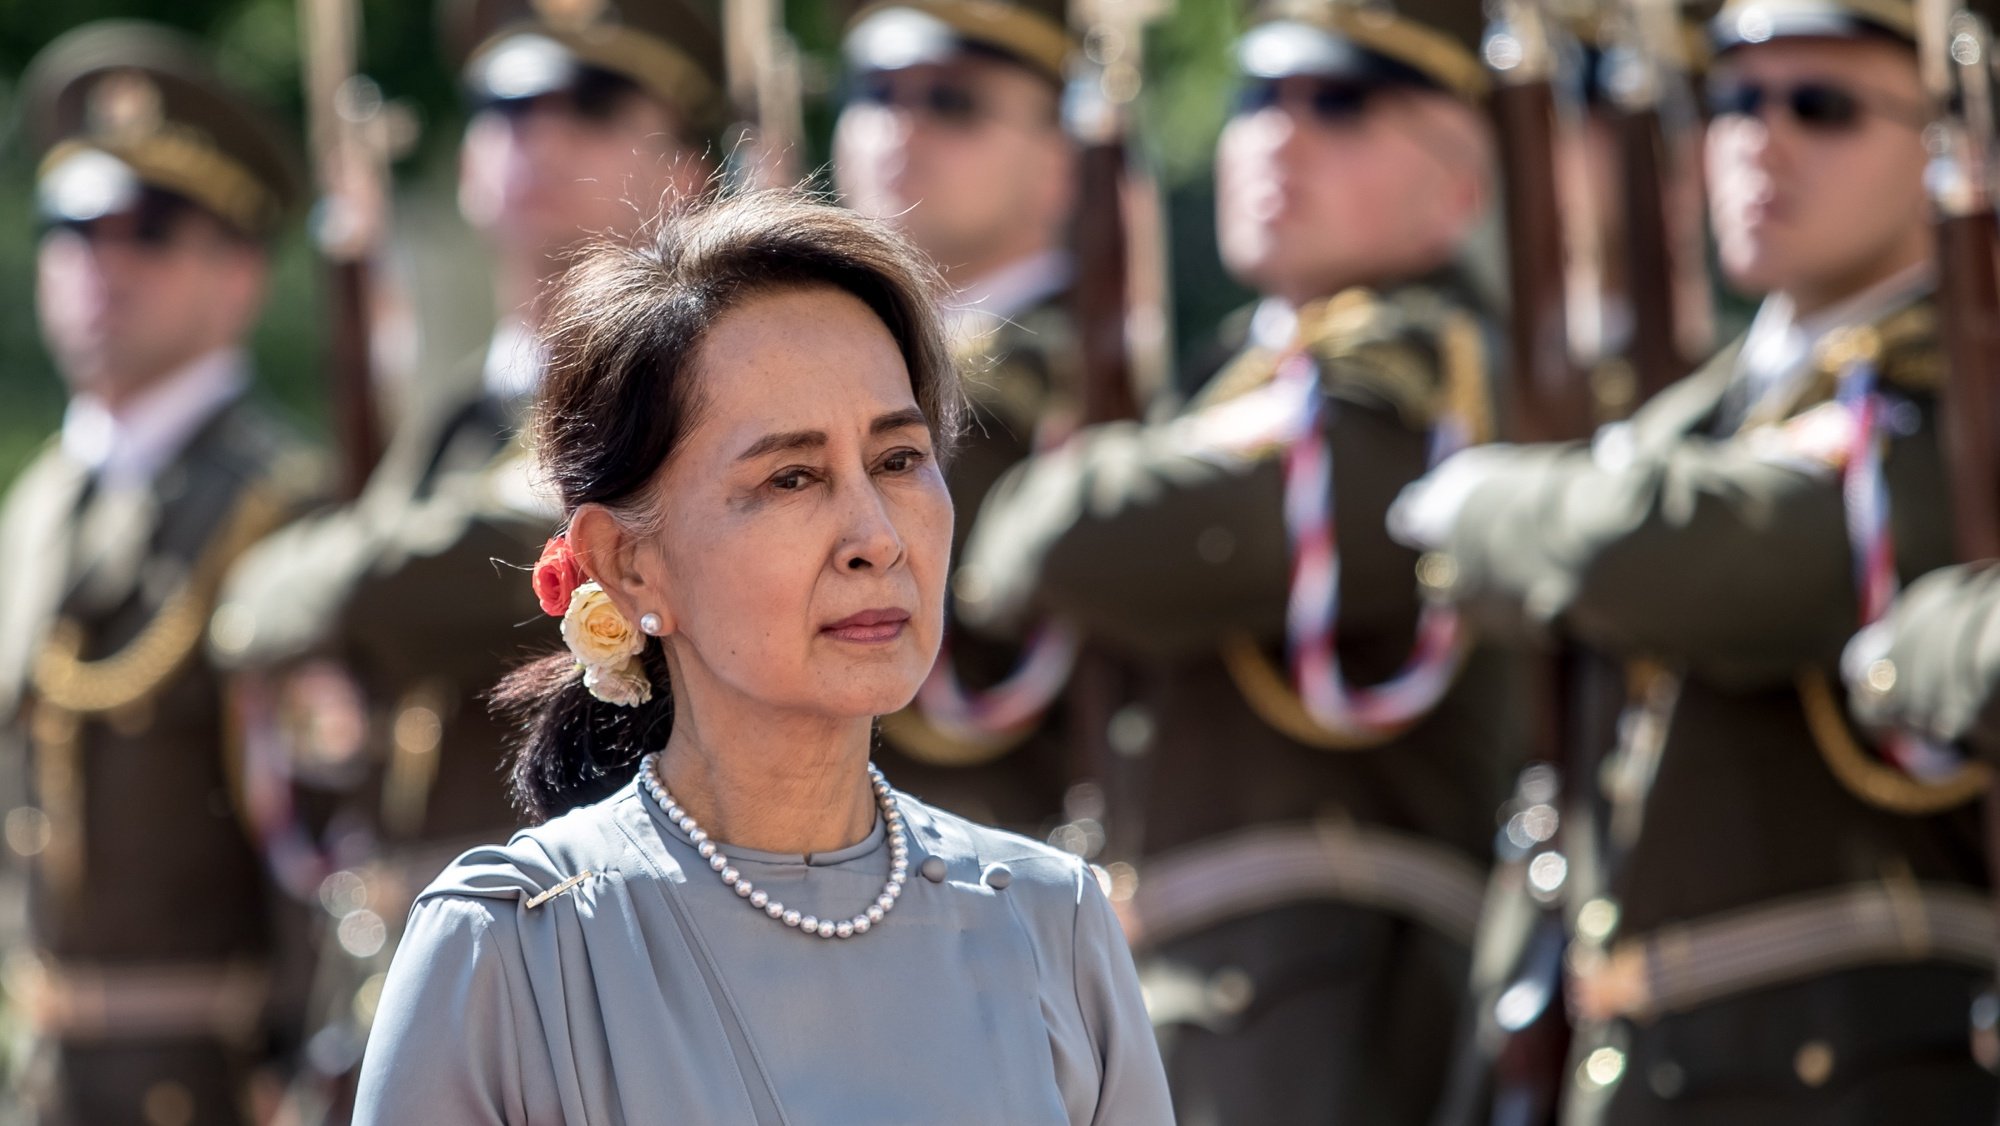 epa09676614 (FILE) - Myanmar&#039;s State Counselor Aung San Suu Kyi inspects a guard of honor during a welcome ceremony in Prague, Czech Republic, 03 June 2019 (reissued 10 January 2022).  Myanmar’s ousted civilian leader Aung San Suu Kyi has been convicted of three criminal charges and sentenced to four years in prison in the second round of verdicts handed out by a court on 10 January 2022.  EPA/MARTIN DIVISEK